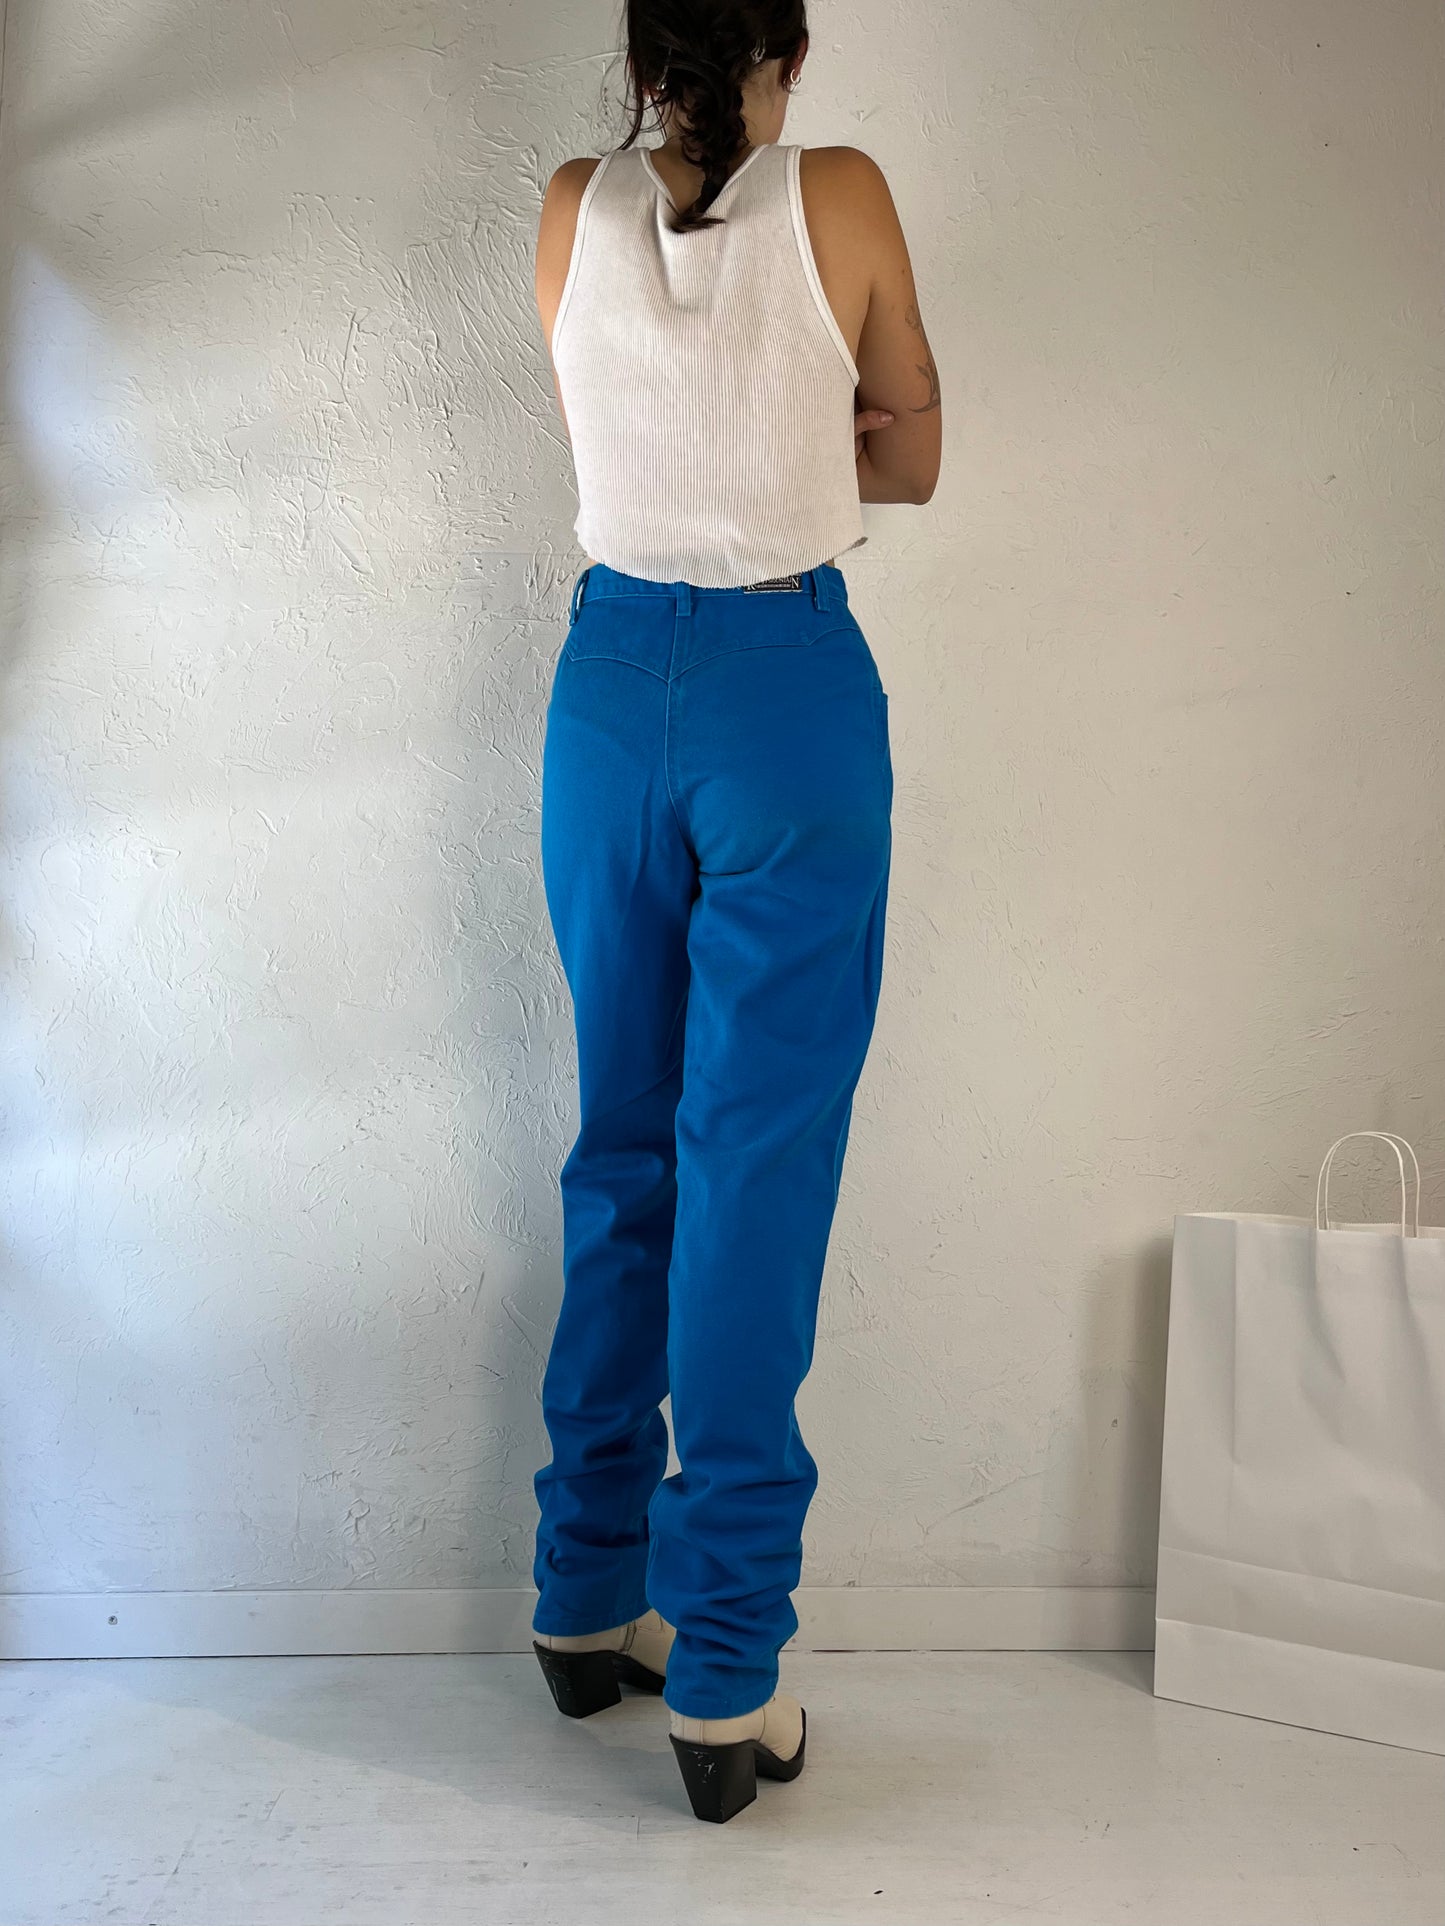 90s 'Rocky Mountain' Blue High Waisted Jeans / Small